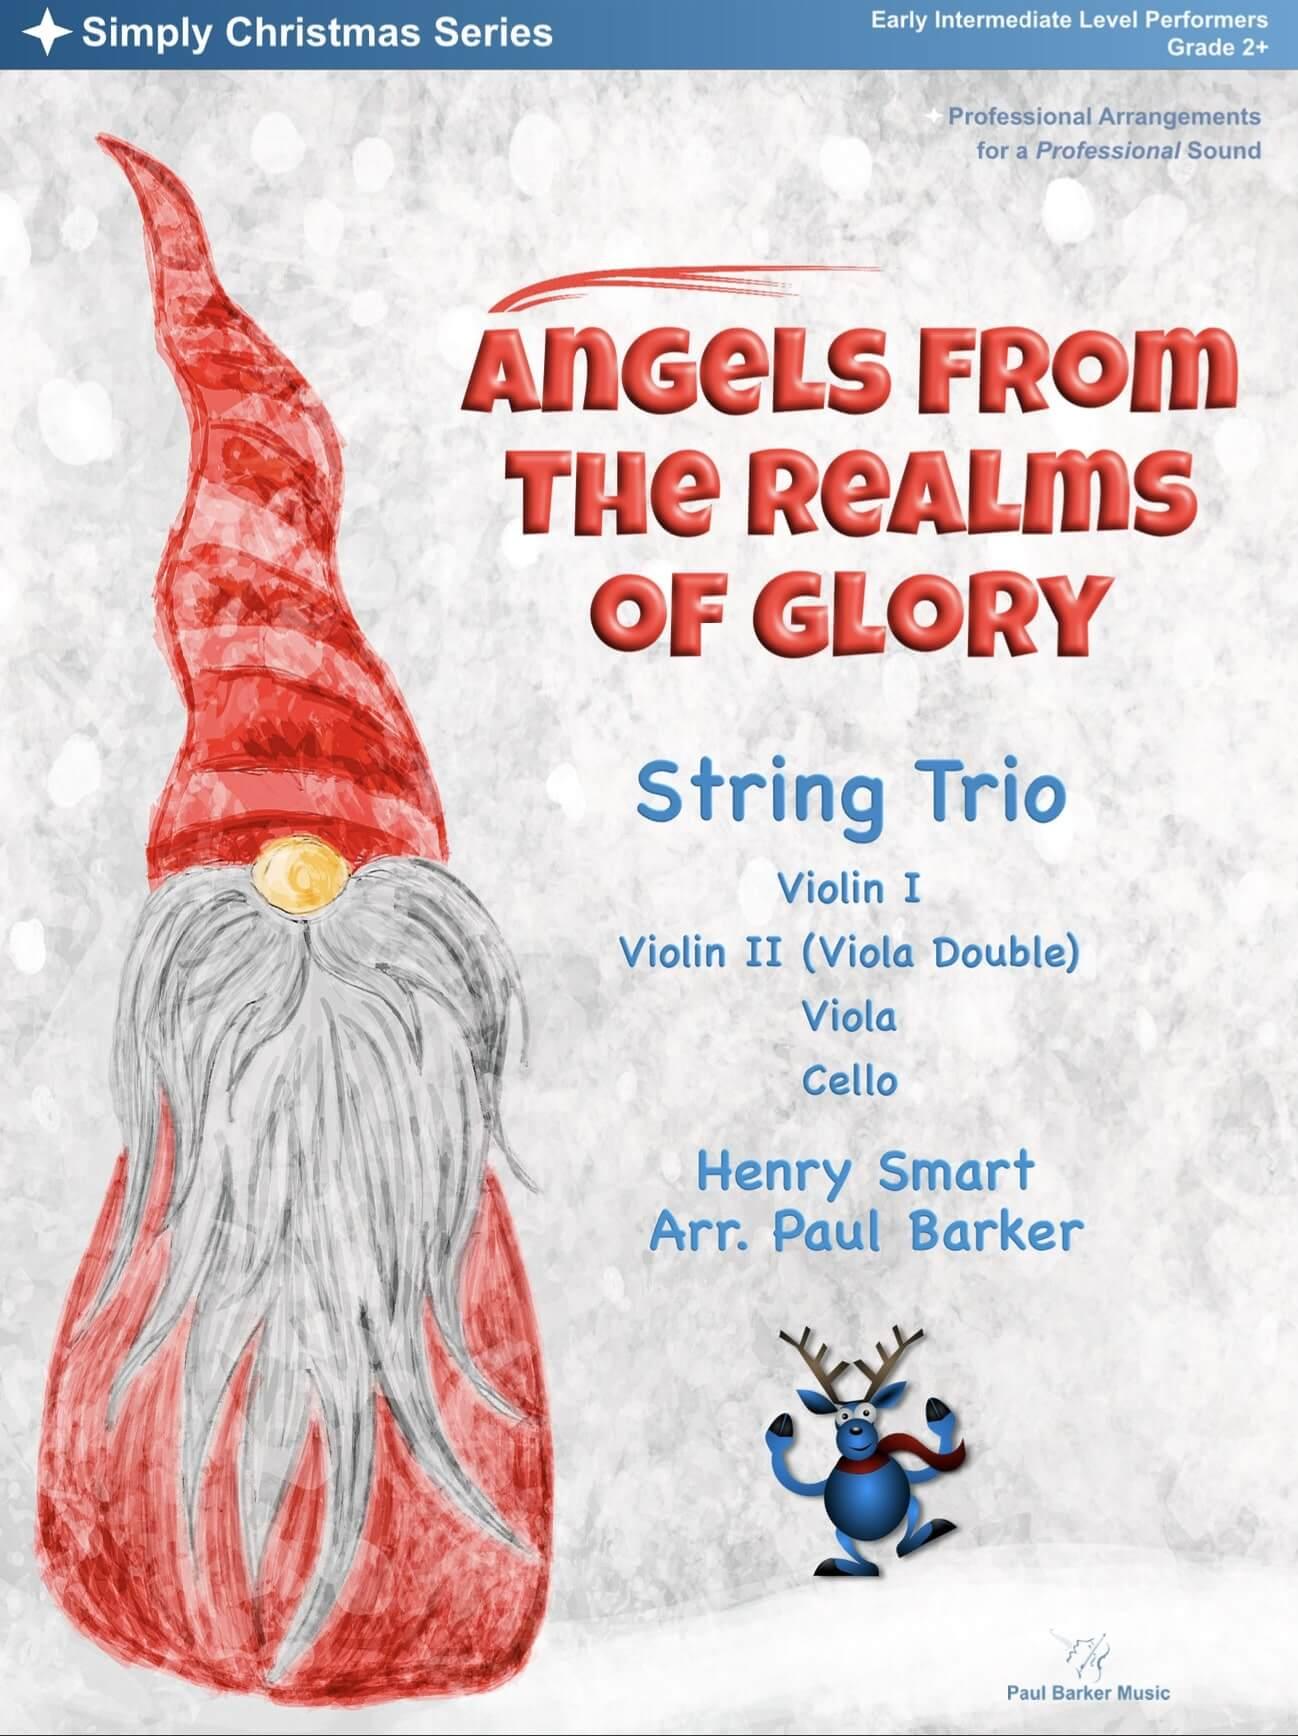 Angels From The Realms Of Glory (String Trio) - Paul Barker Music 